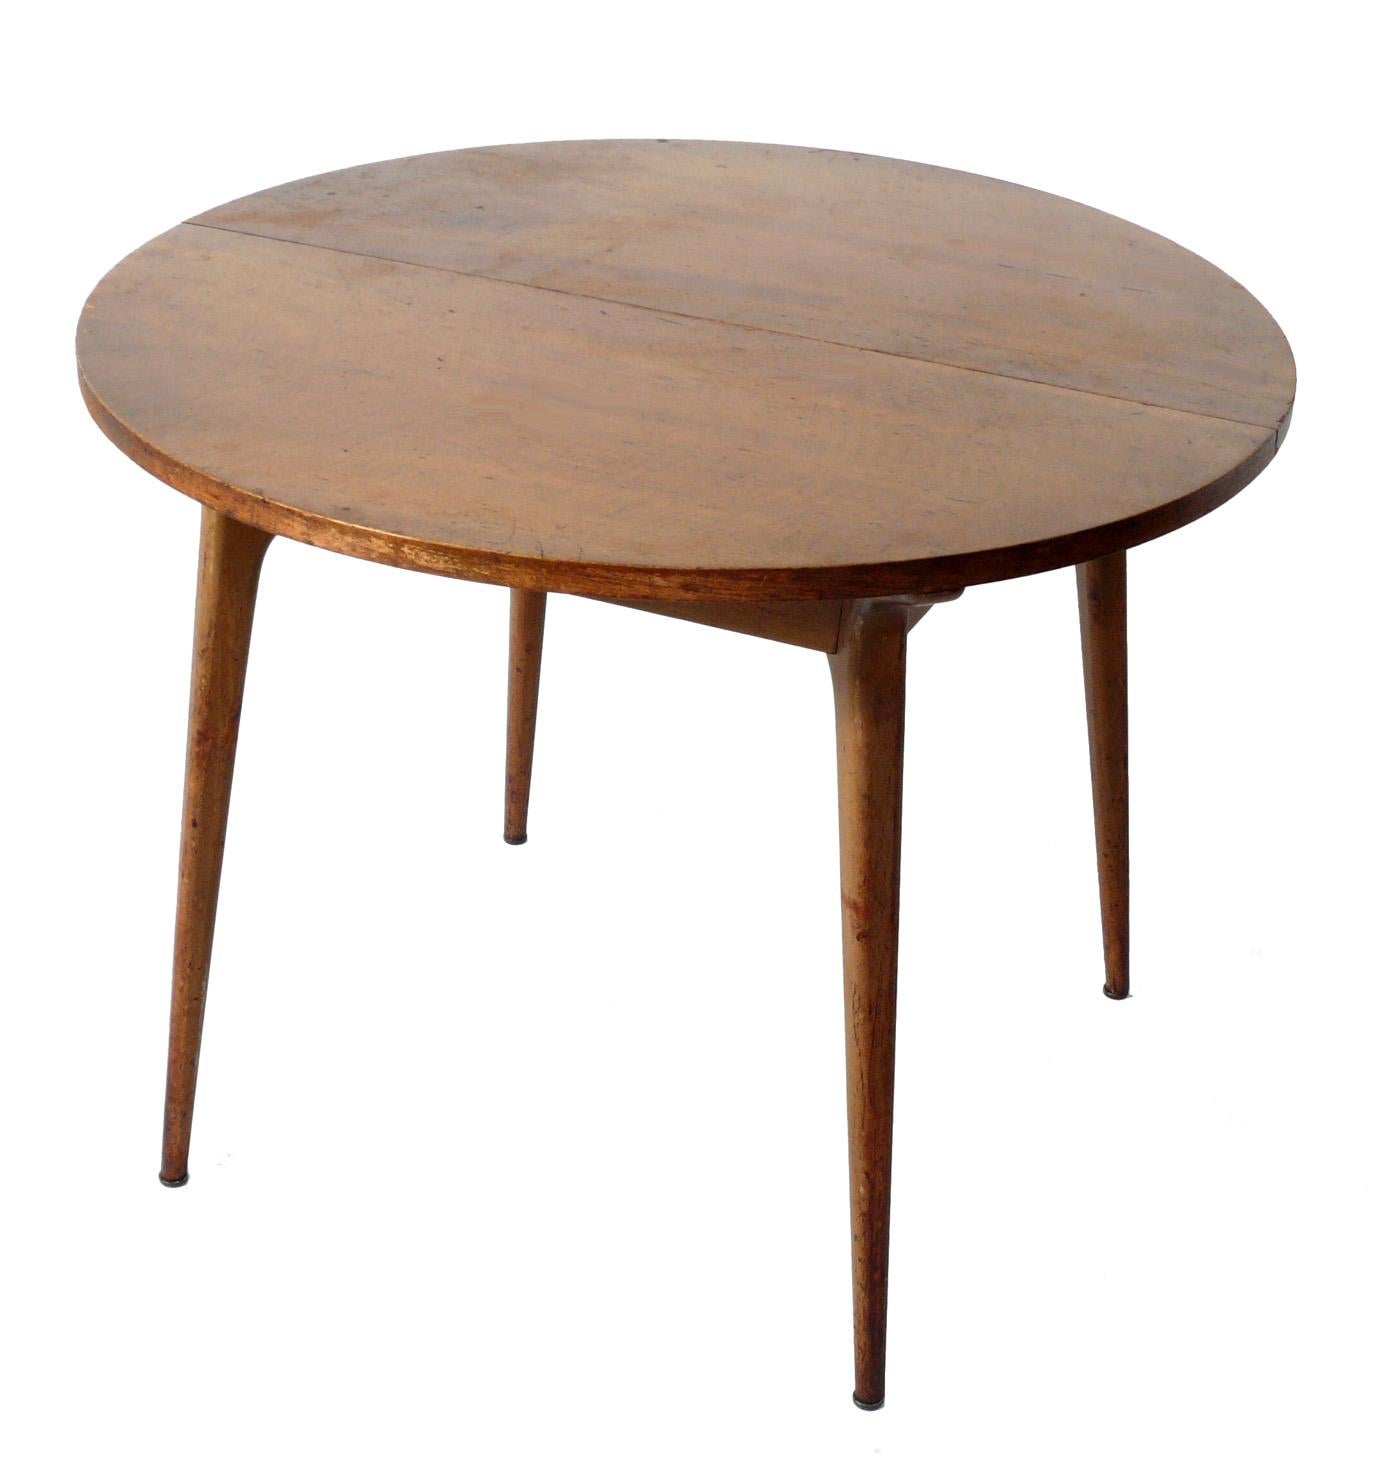 Italian modern dining table, designed by Bertha Schaefer for Singer and Sons, Italy, circa 1950s. This table is currently being refinished and can be completed in your choice of color. The price noted includes refinishing. Schaefer designed this